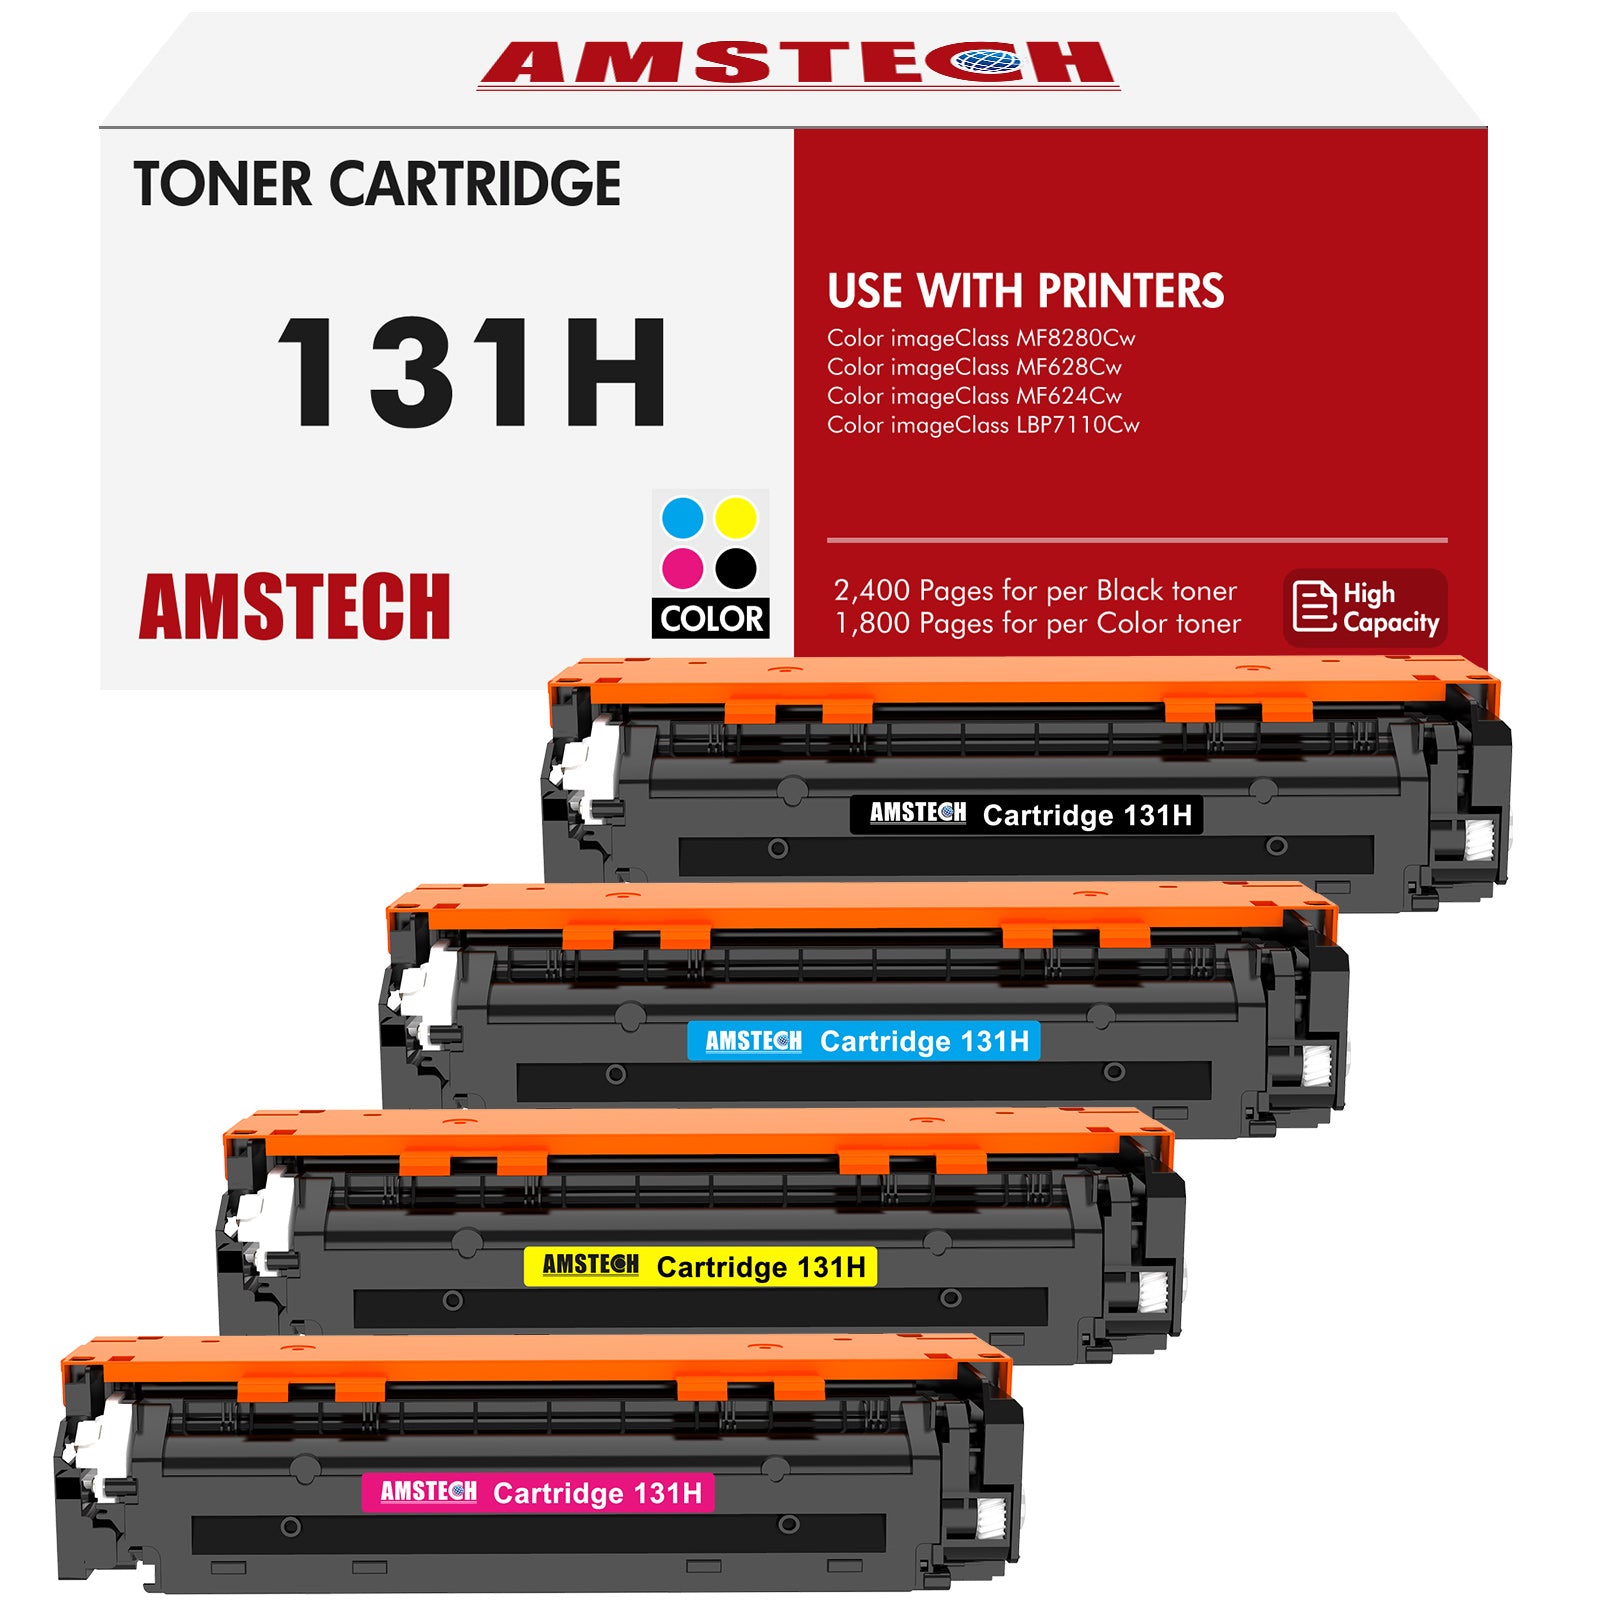 Amstech 4-Pack Compatible Toner for Canon 131 131IIK 131C 131Y 131M imageClass MF8280Cw MF628Cw MF624Cw LBP7110Cw Printer Ink(Black, Cyan, Magenta, Yellow)